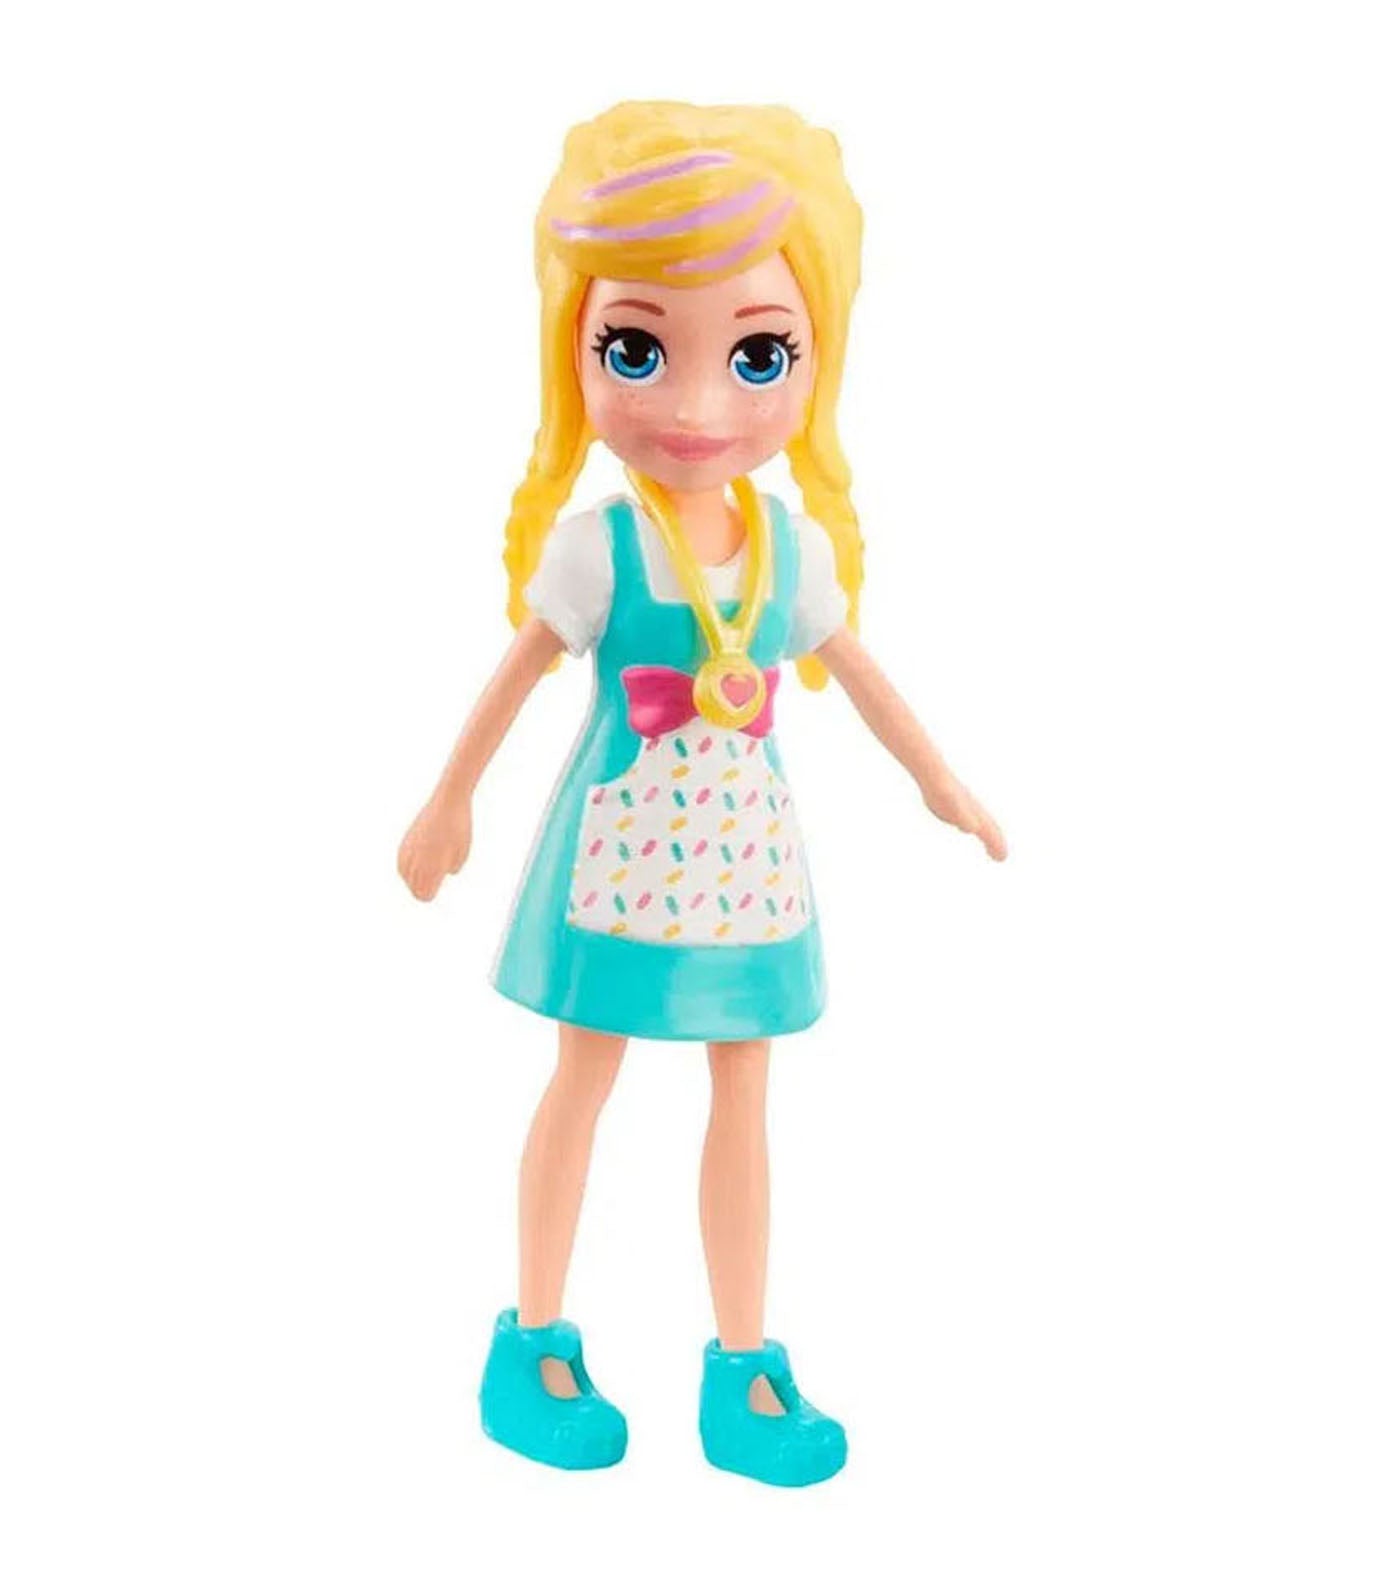 Impulse 3in Doll - Polly with Sprinkle Dress